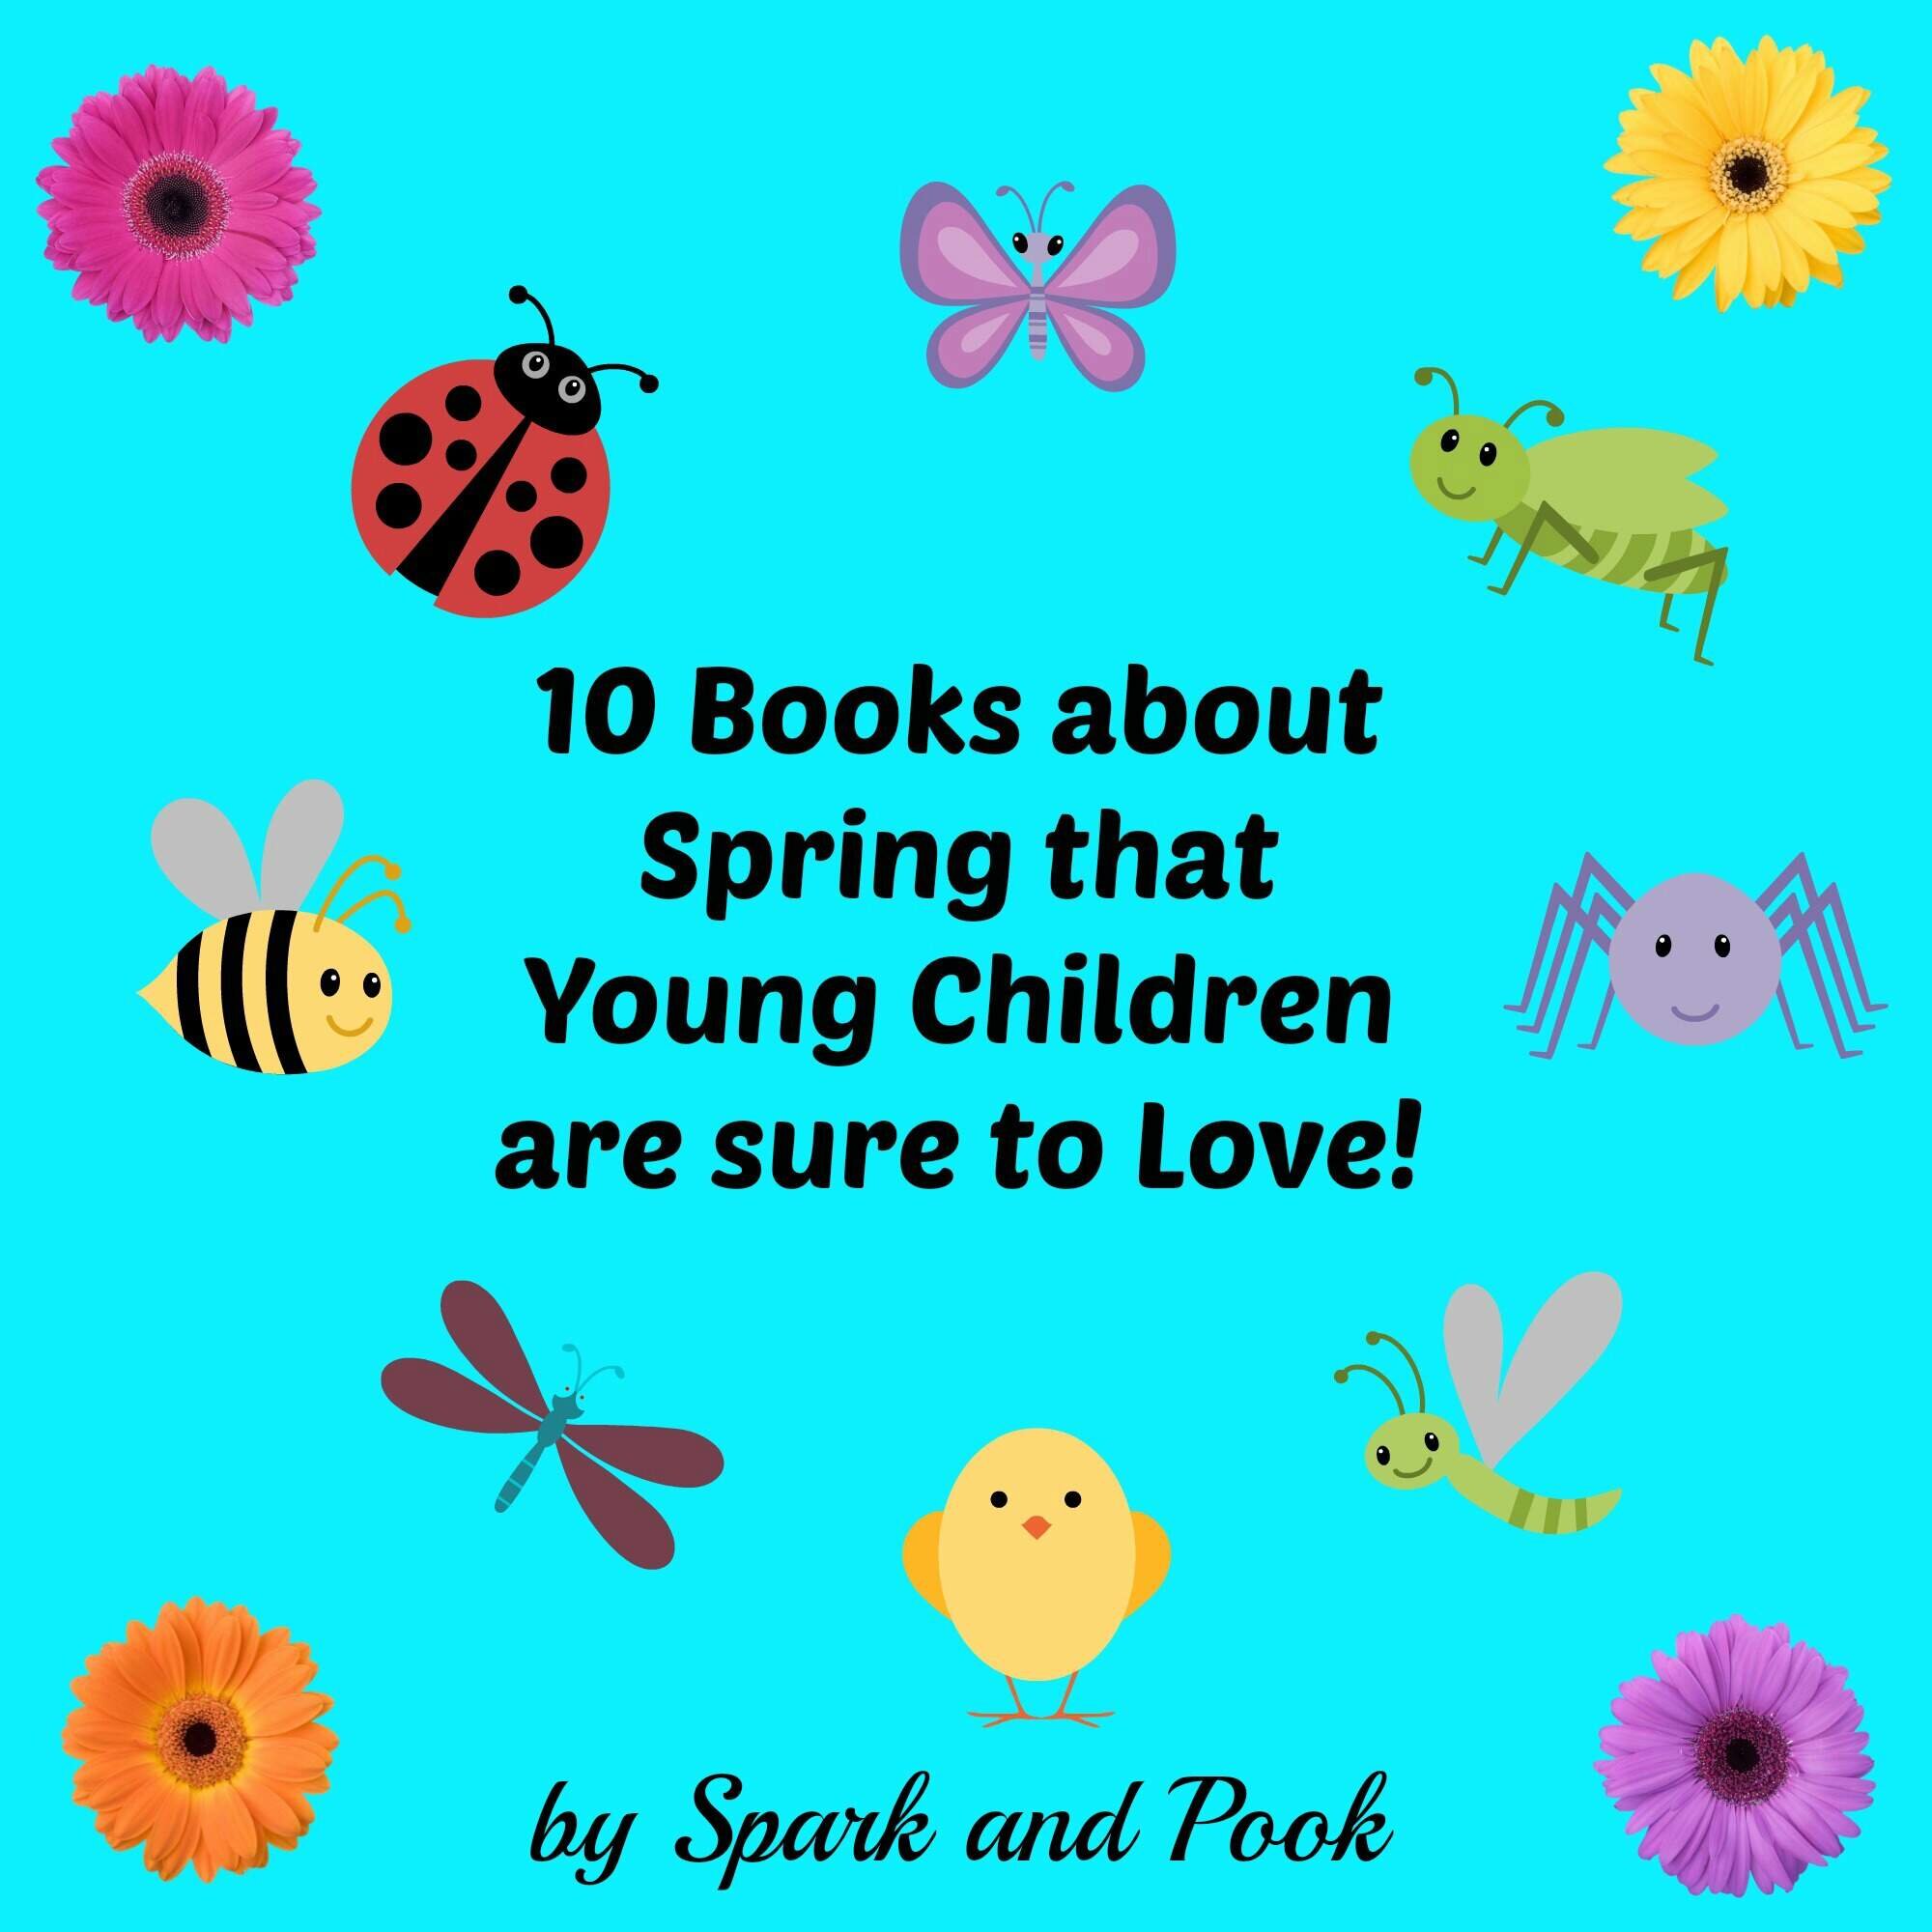 10 Books about Spring for Young Children